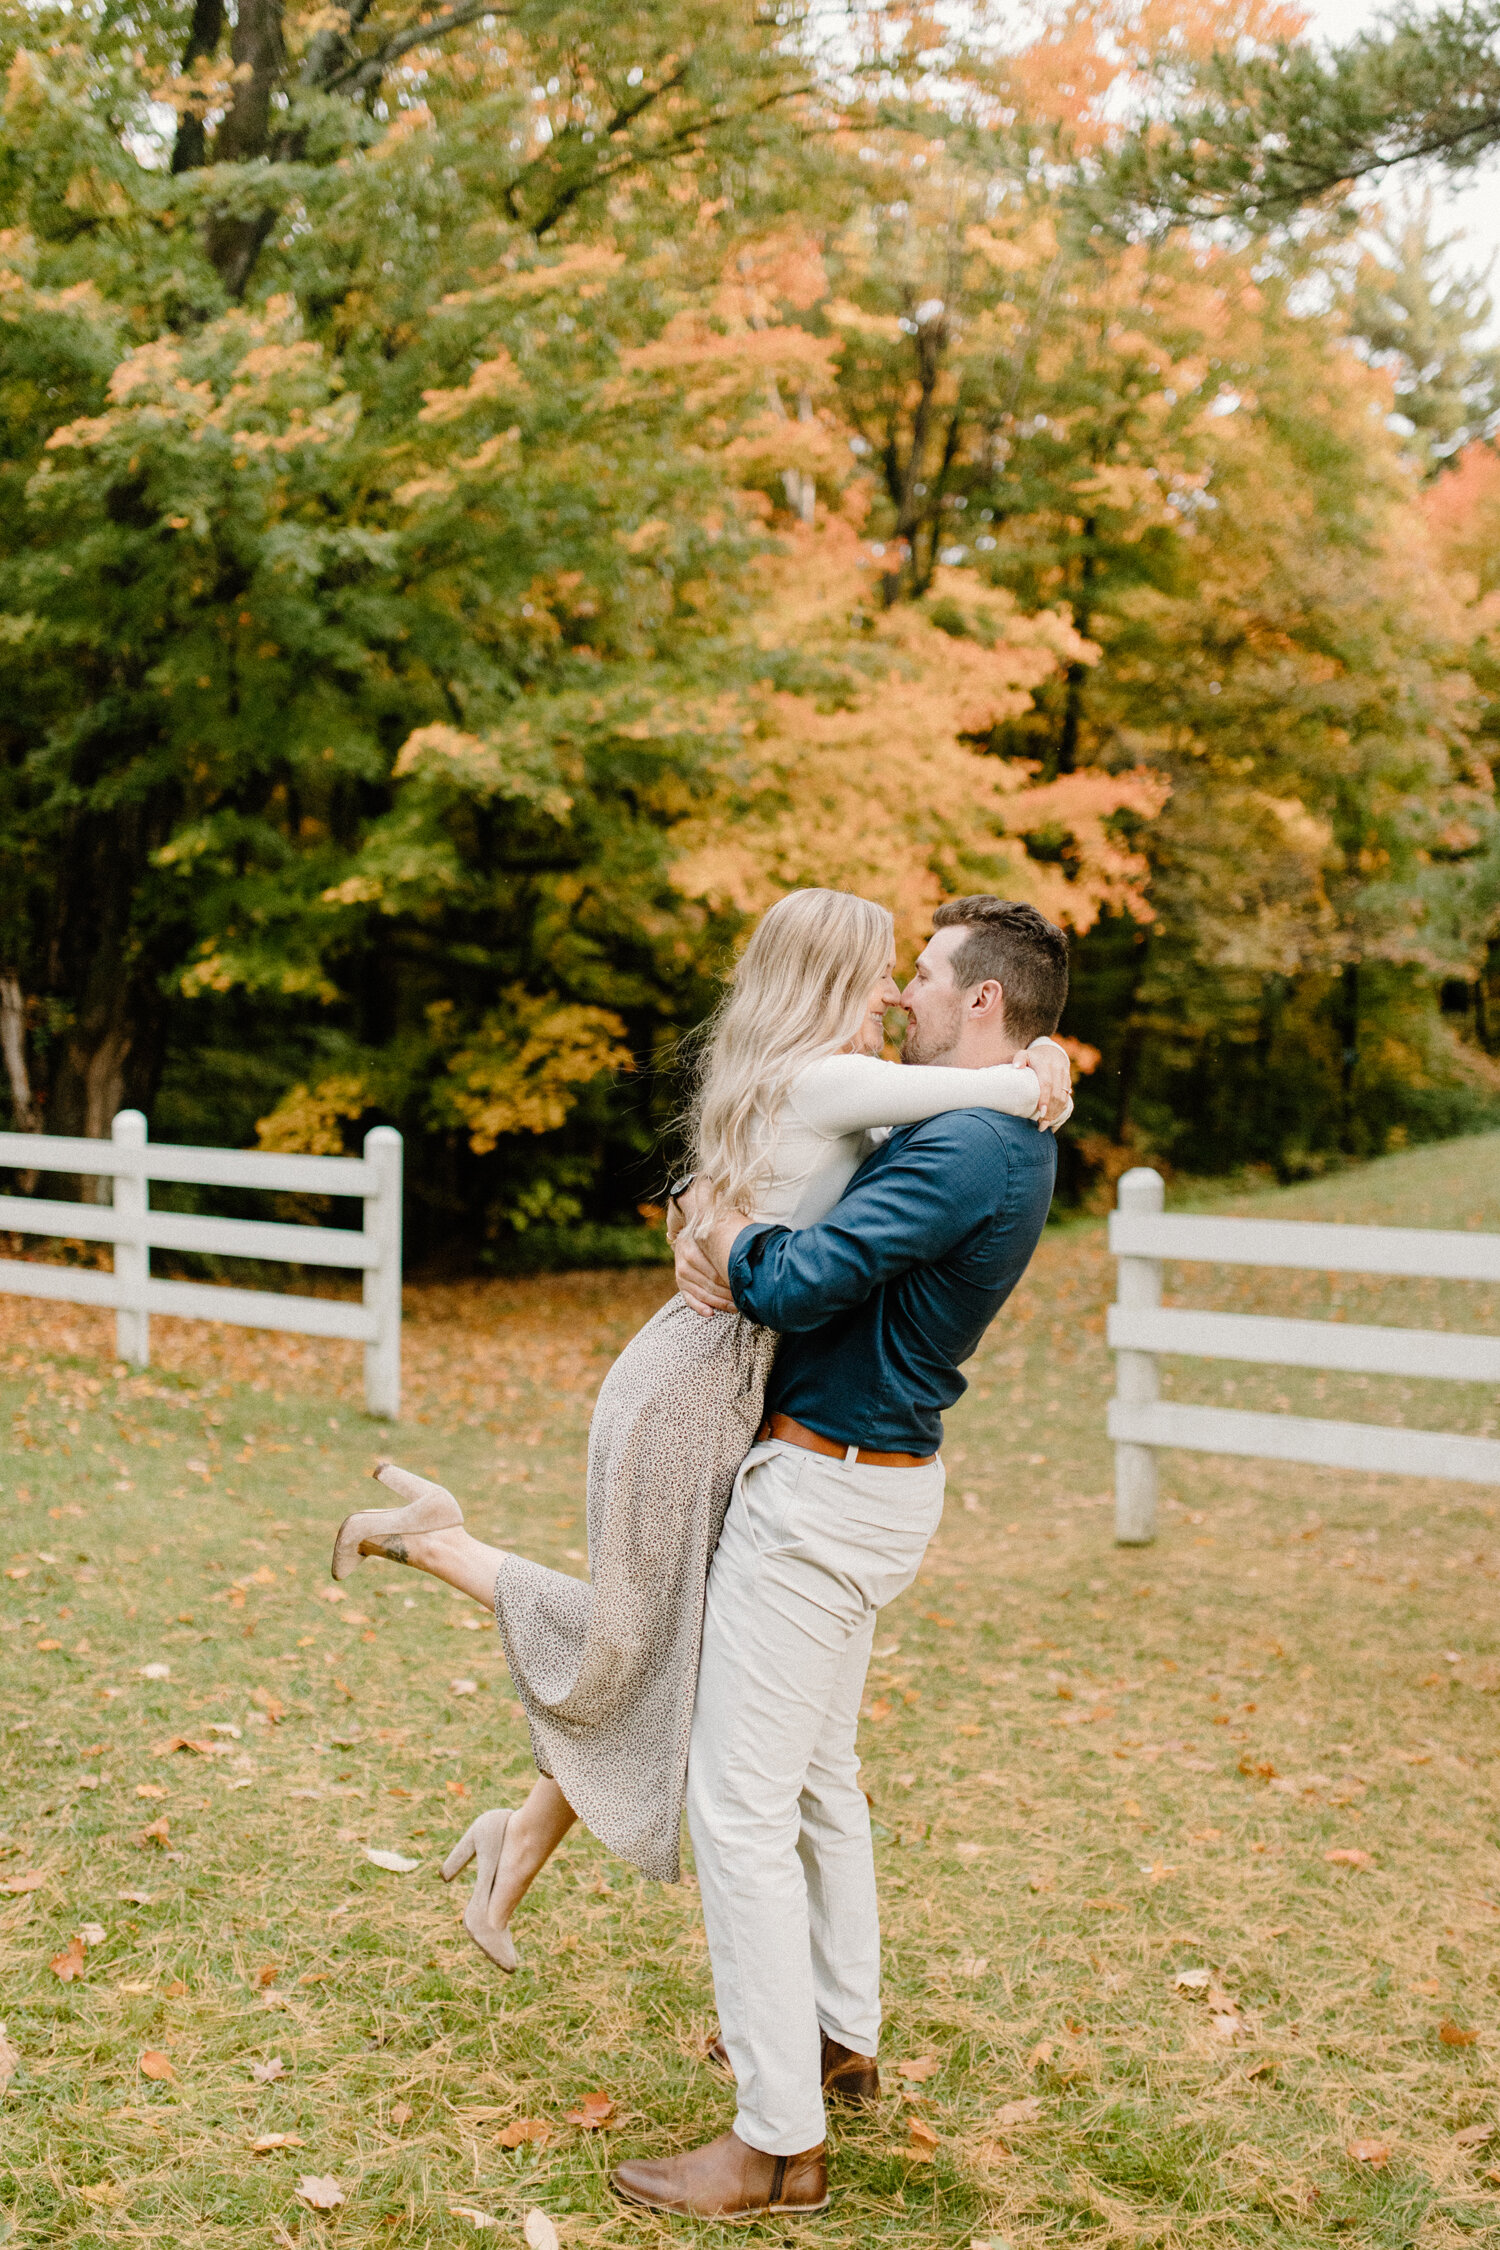  During this playful Ottawa, Canada engagement session, Chelsea Mason Photography captures this groom holding his bride while she wraps her arms around his neck. playful engagement session poses, groom holding bride, long medium blonde womens loose c